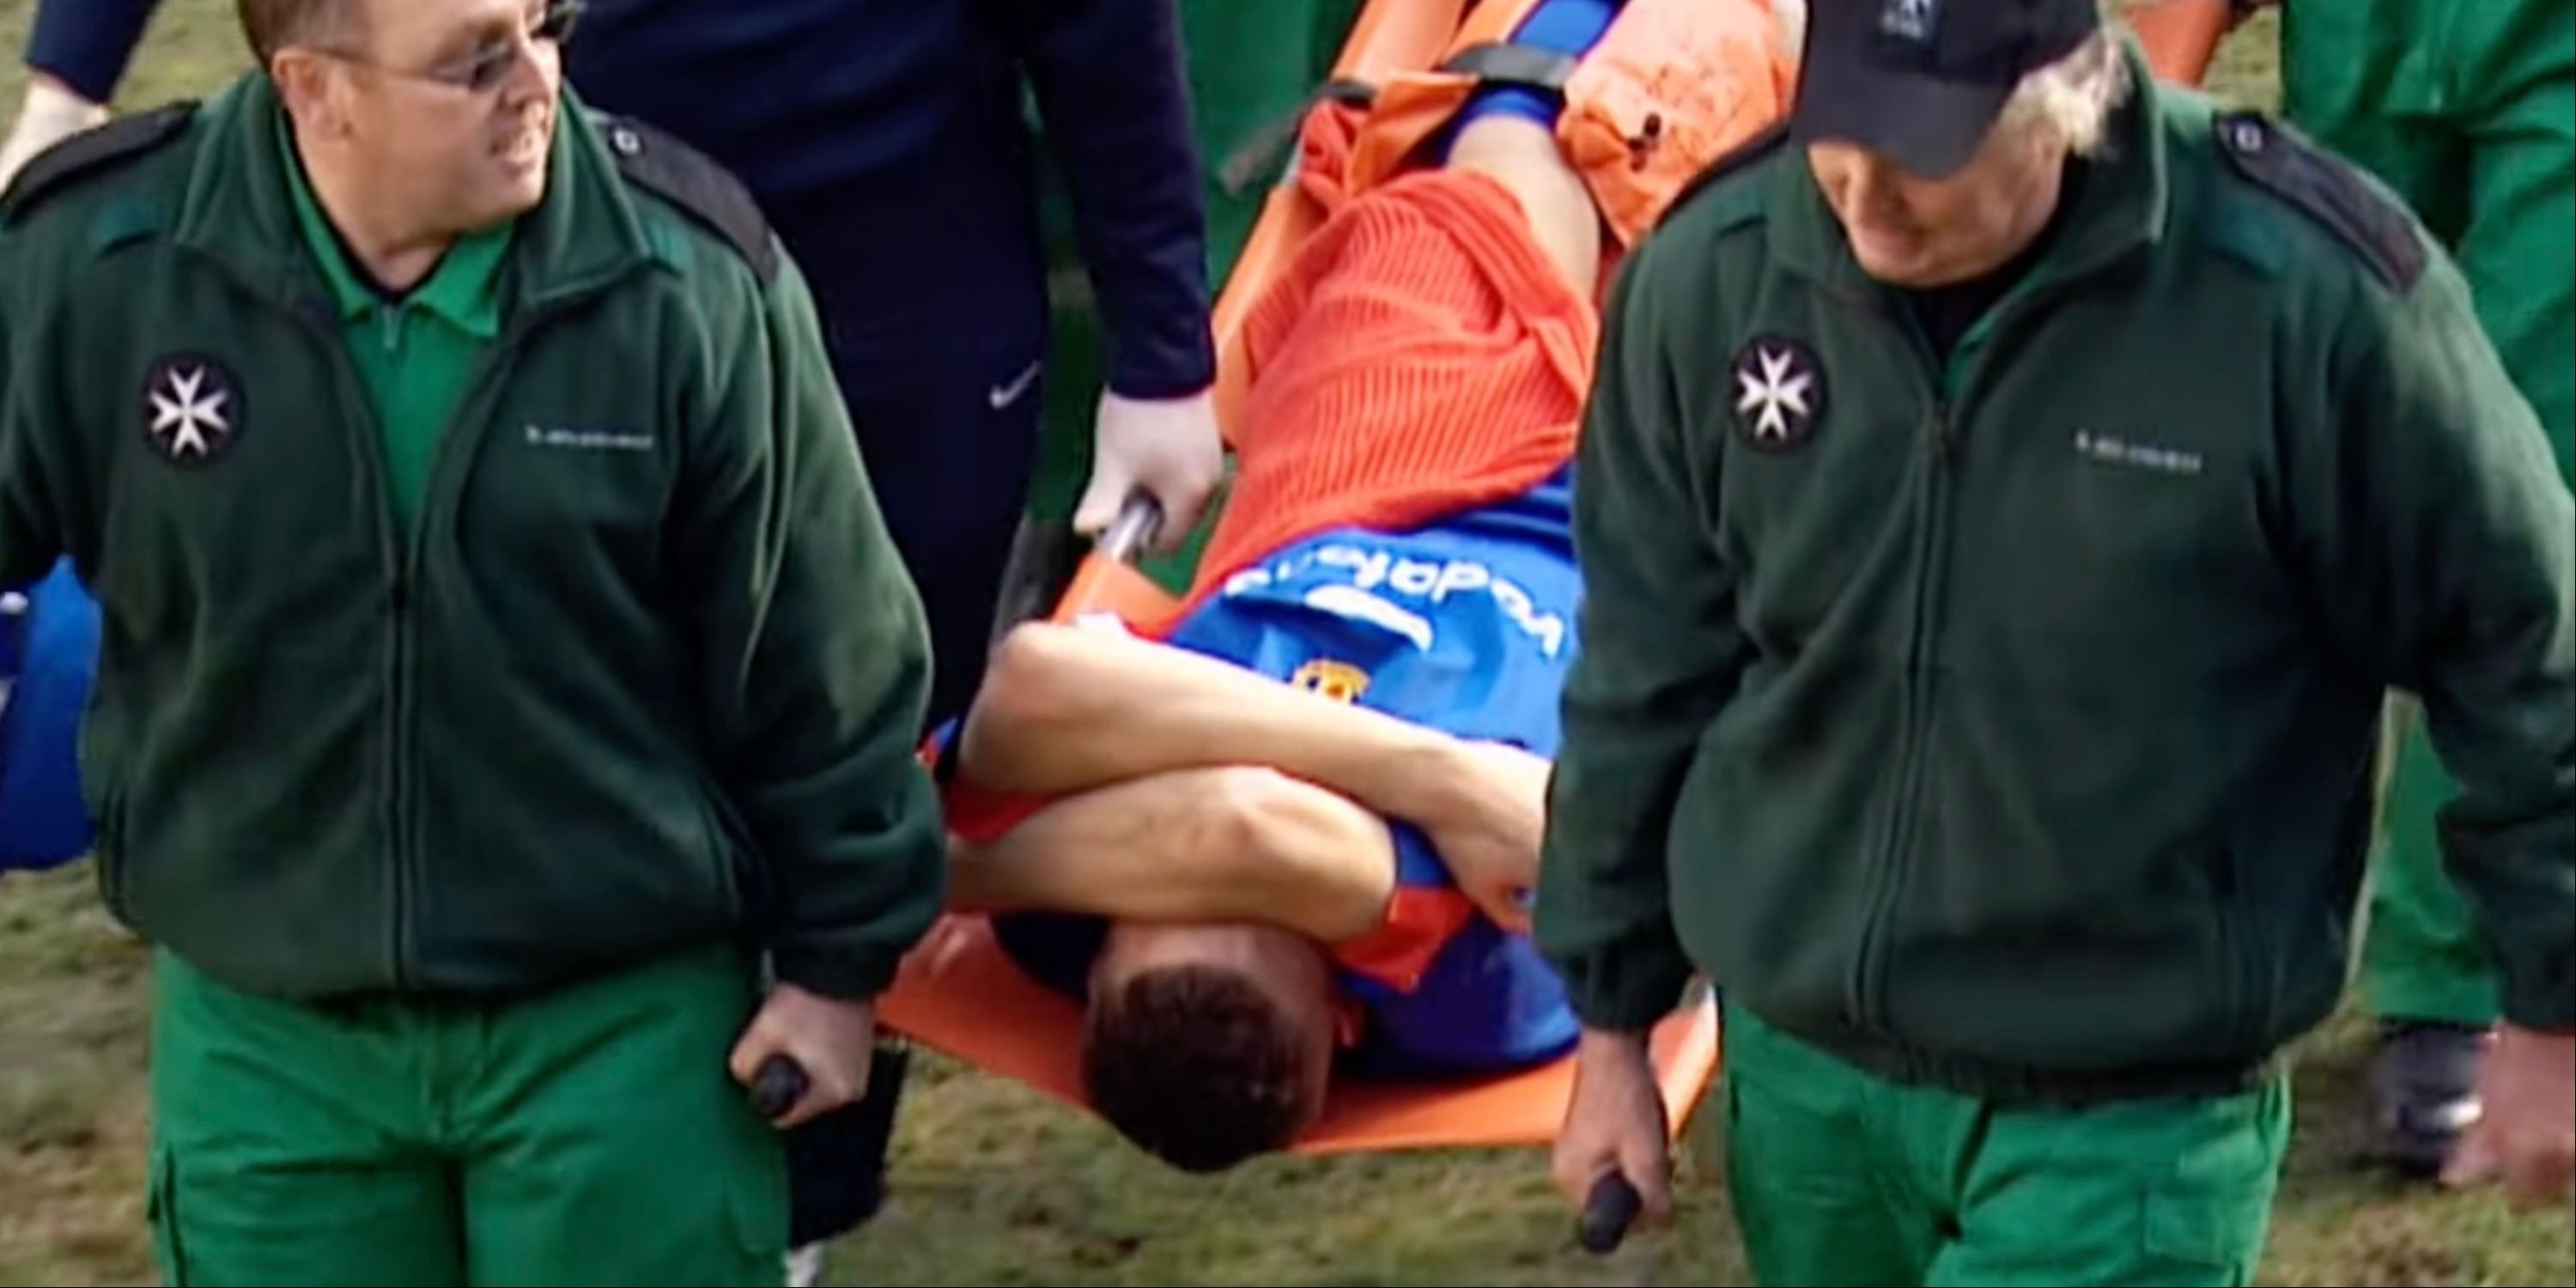 Alan Smith being stretchered off after suffering horrific injury vs Liverpool